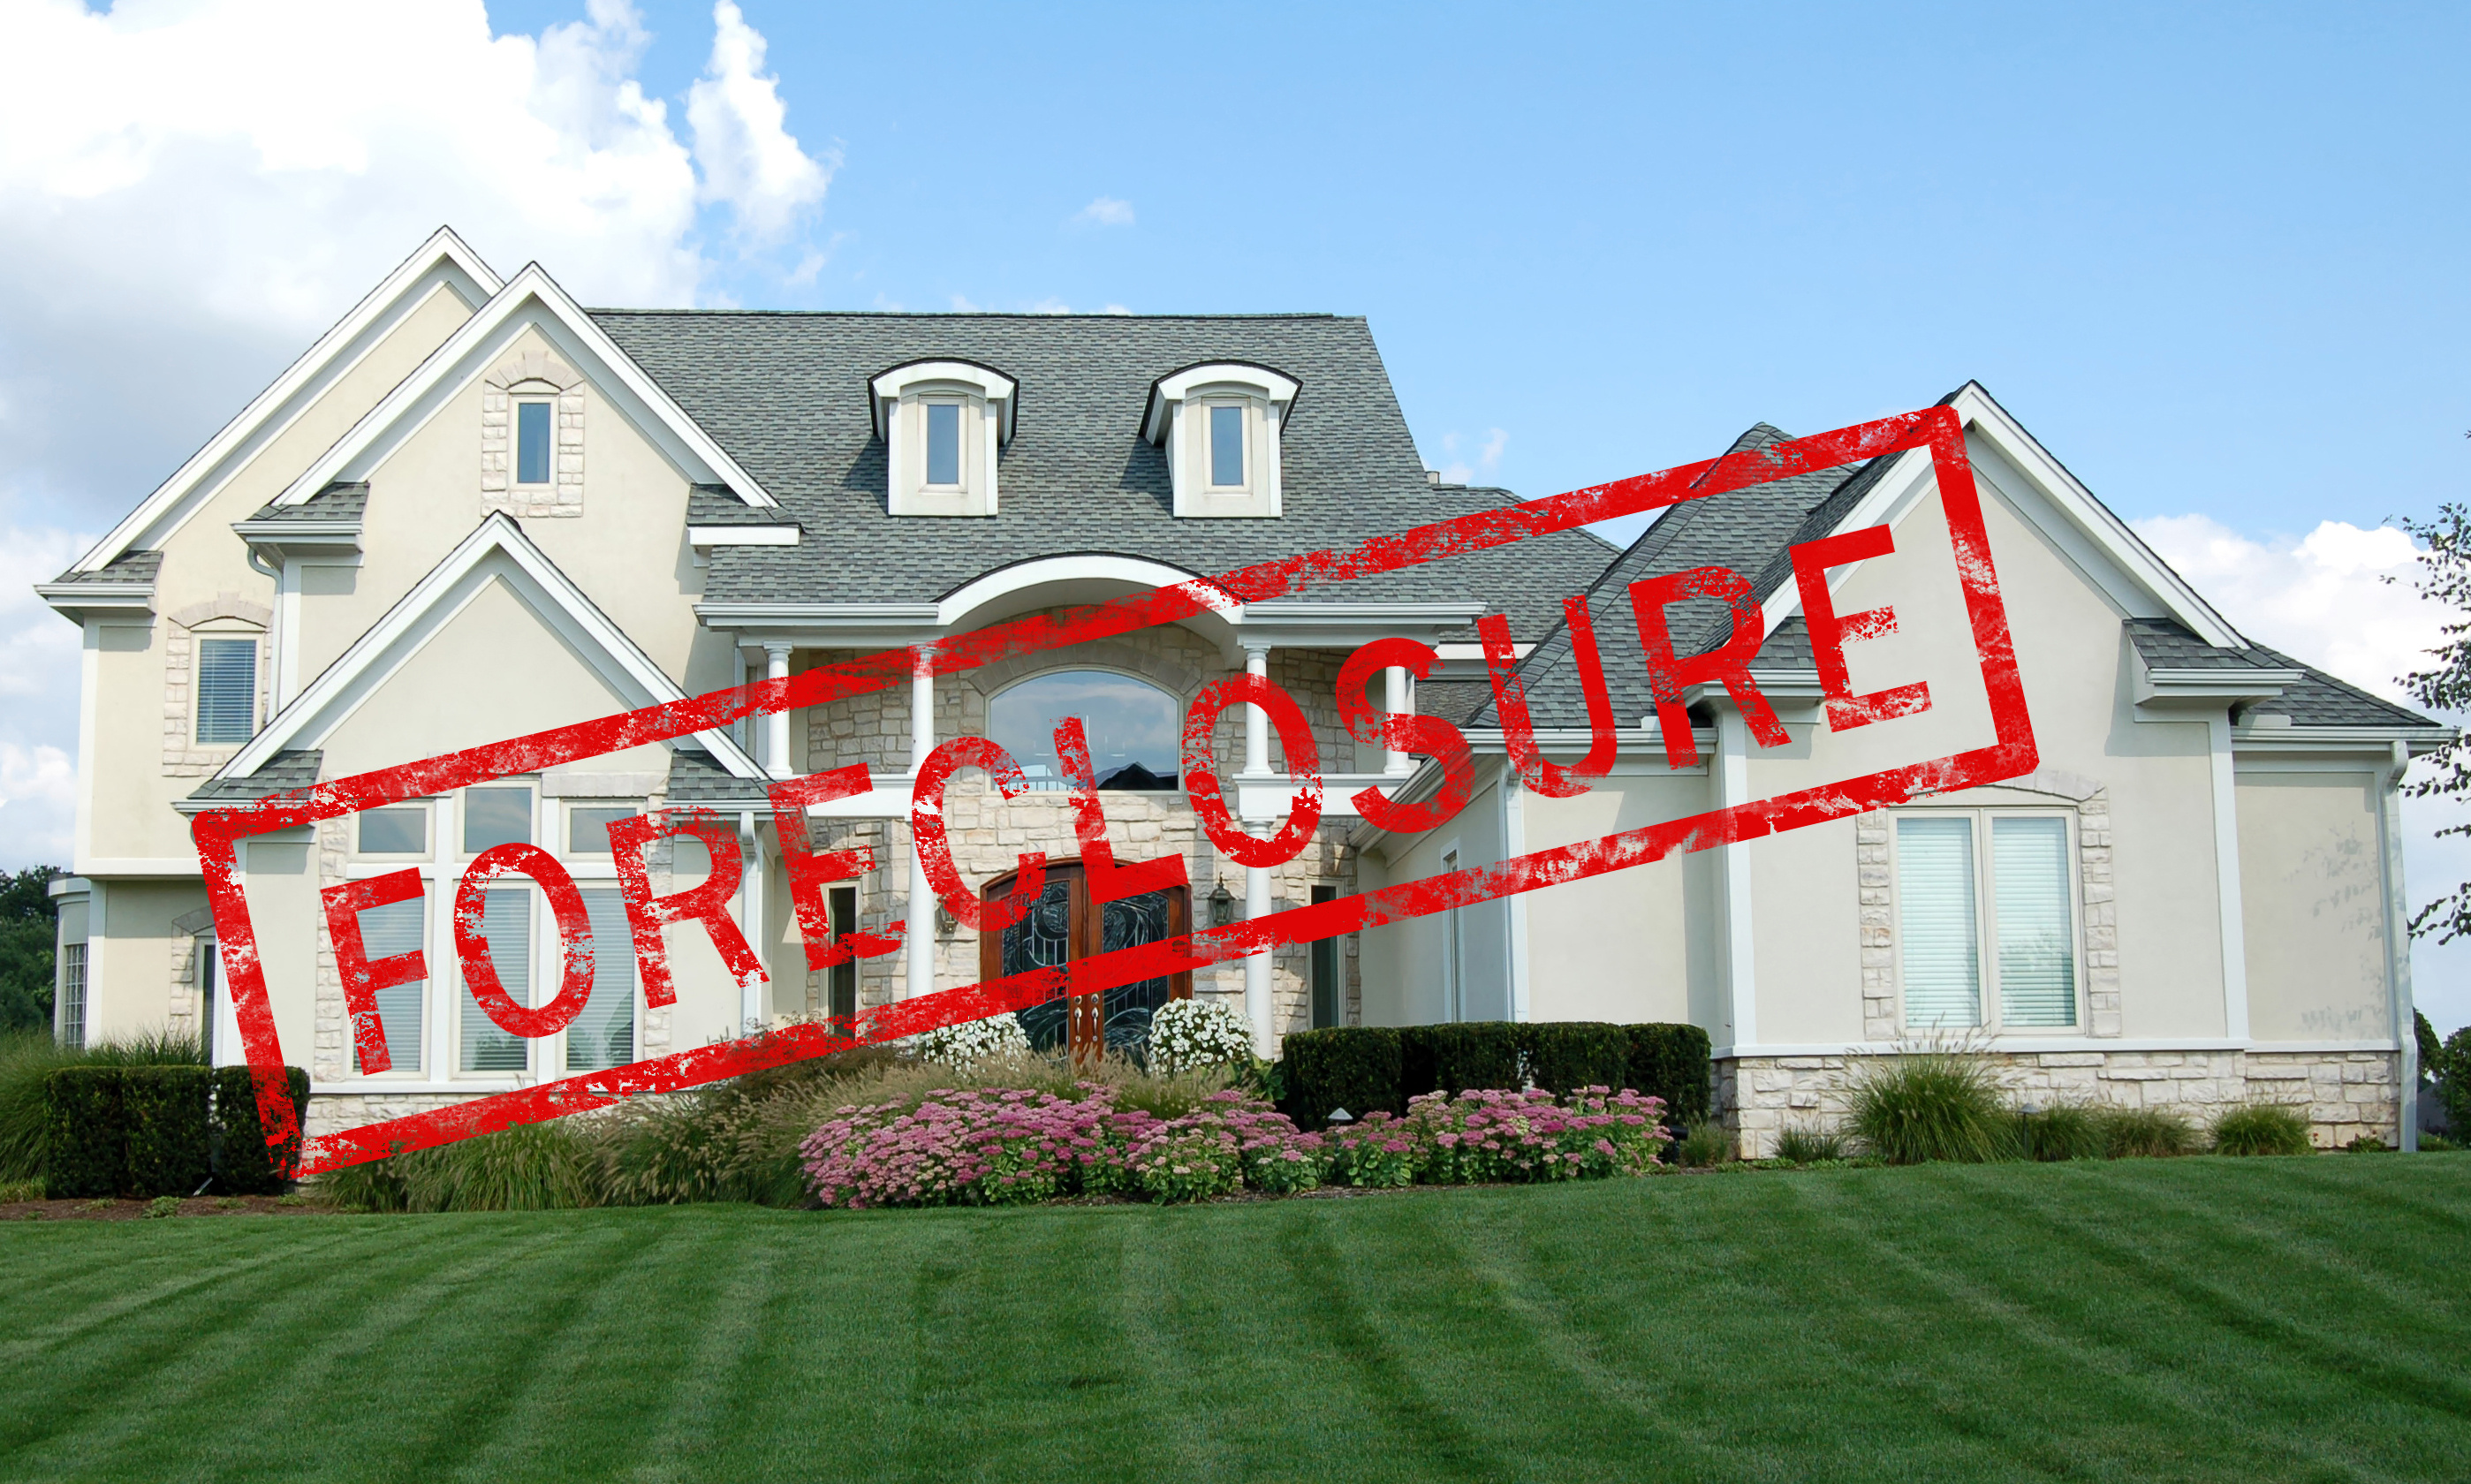 Call Dougherty & Associates, L.L.C. when you need valuations on Warren foreclosures